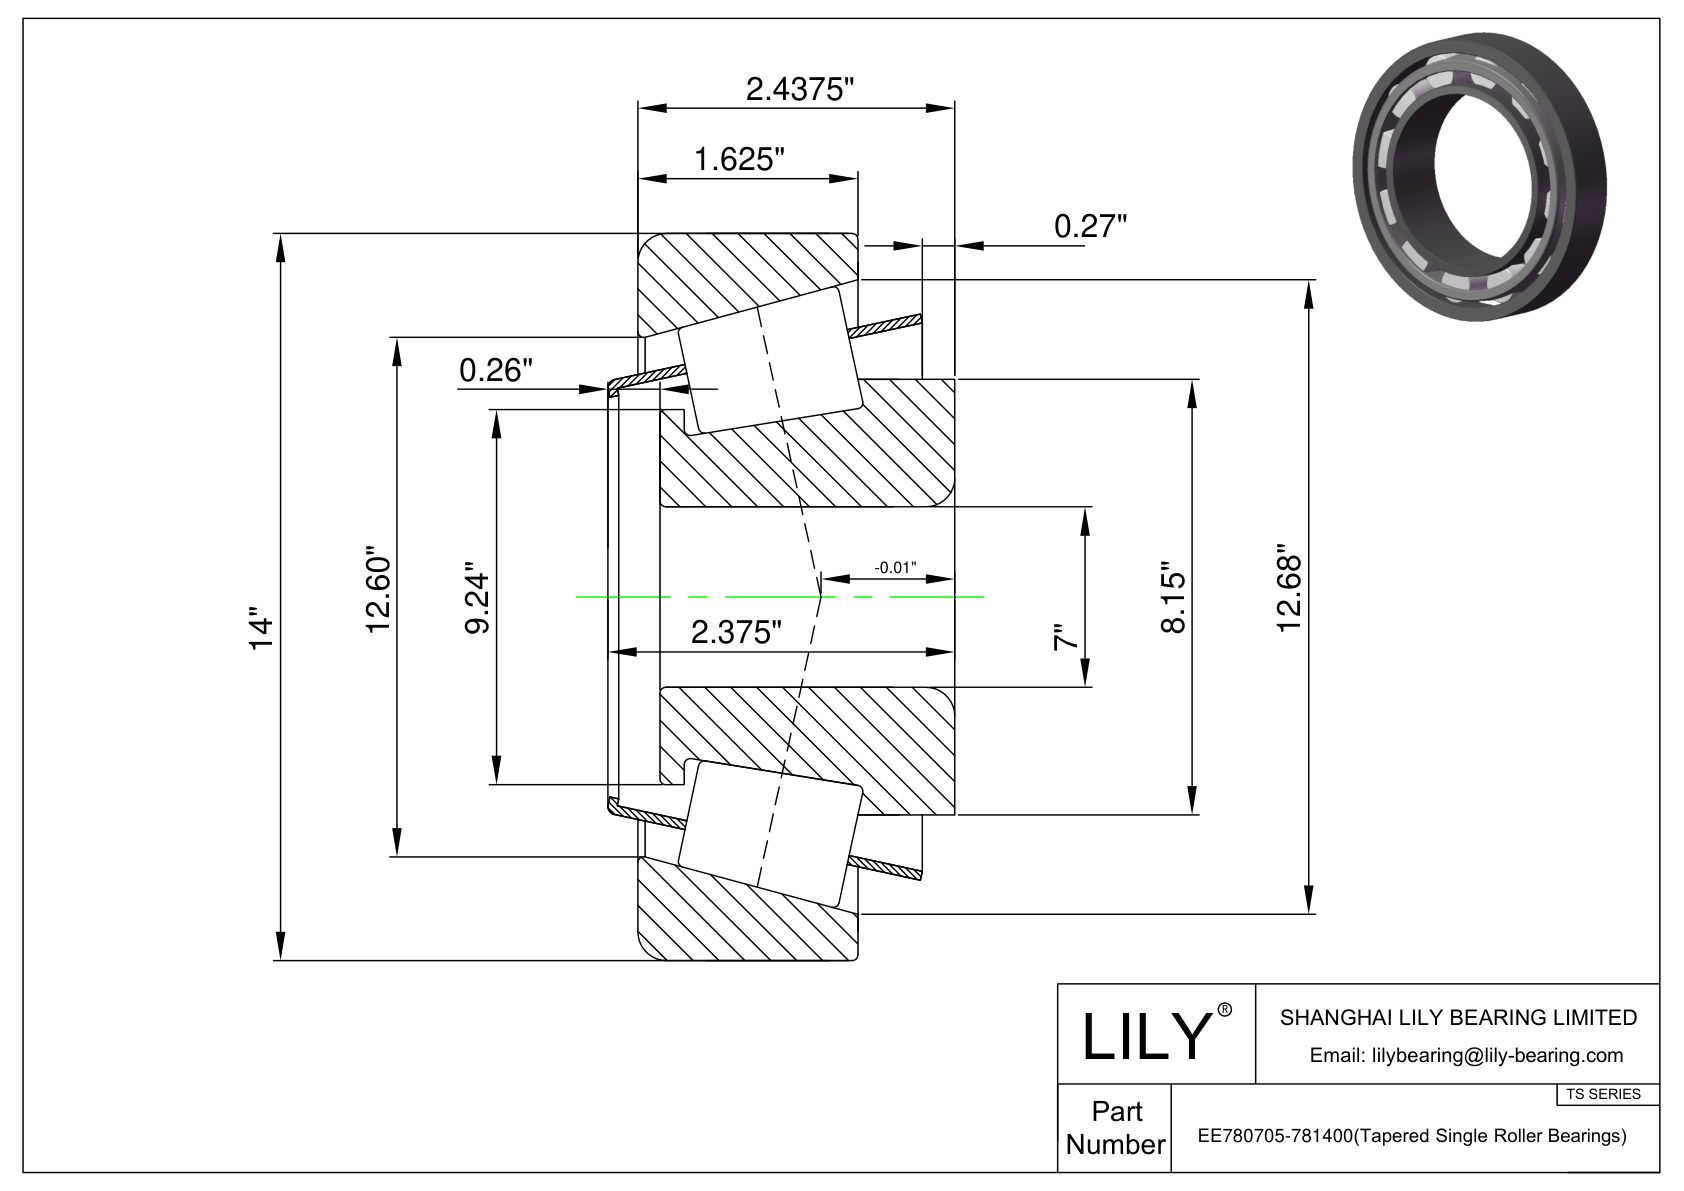 EE780705-781400 TS (Tapered Single Roller Bearings) (Imperial) cad drawing